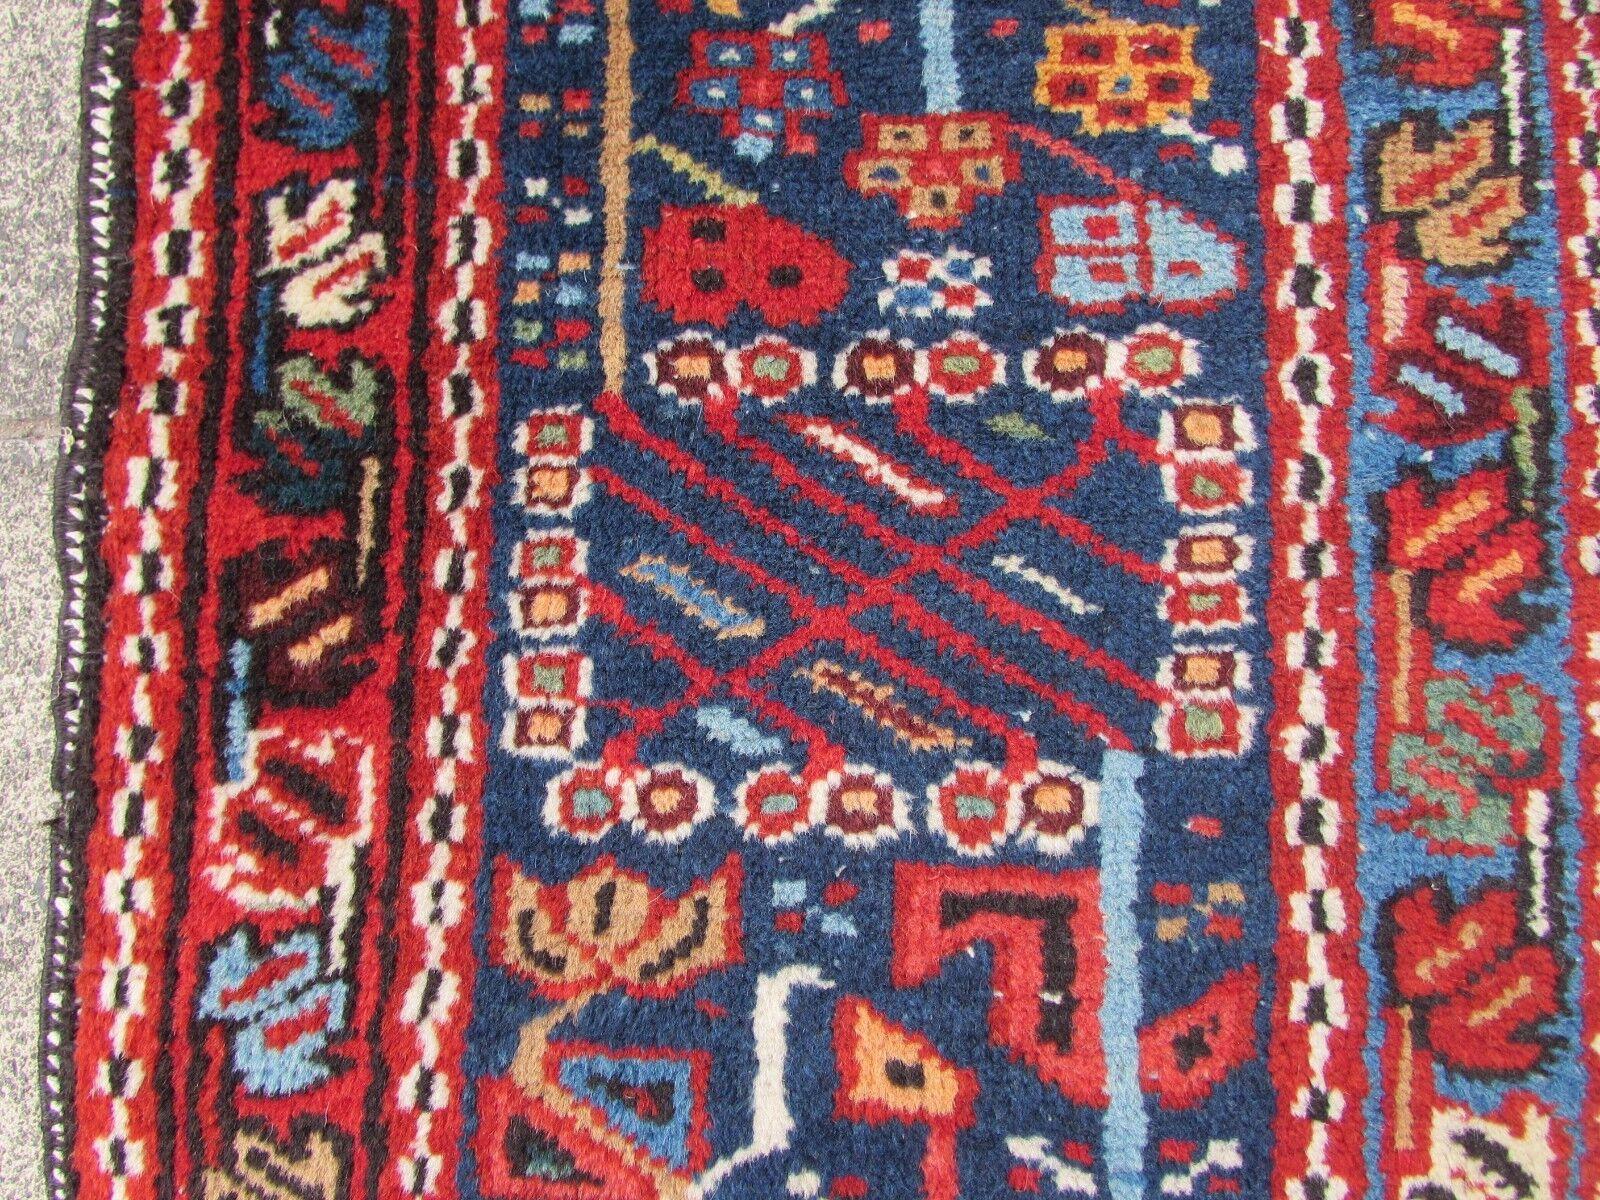  Handmade Antique Persian Style Karajeh Rug 4.6' x 6', 1920s - 1Q56 For Sale 2